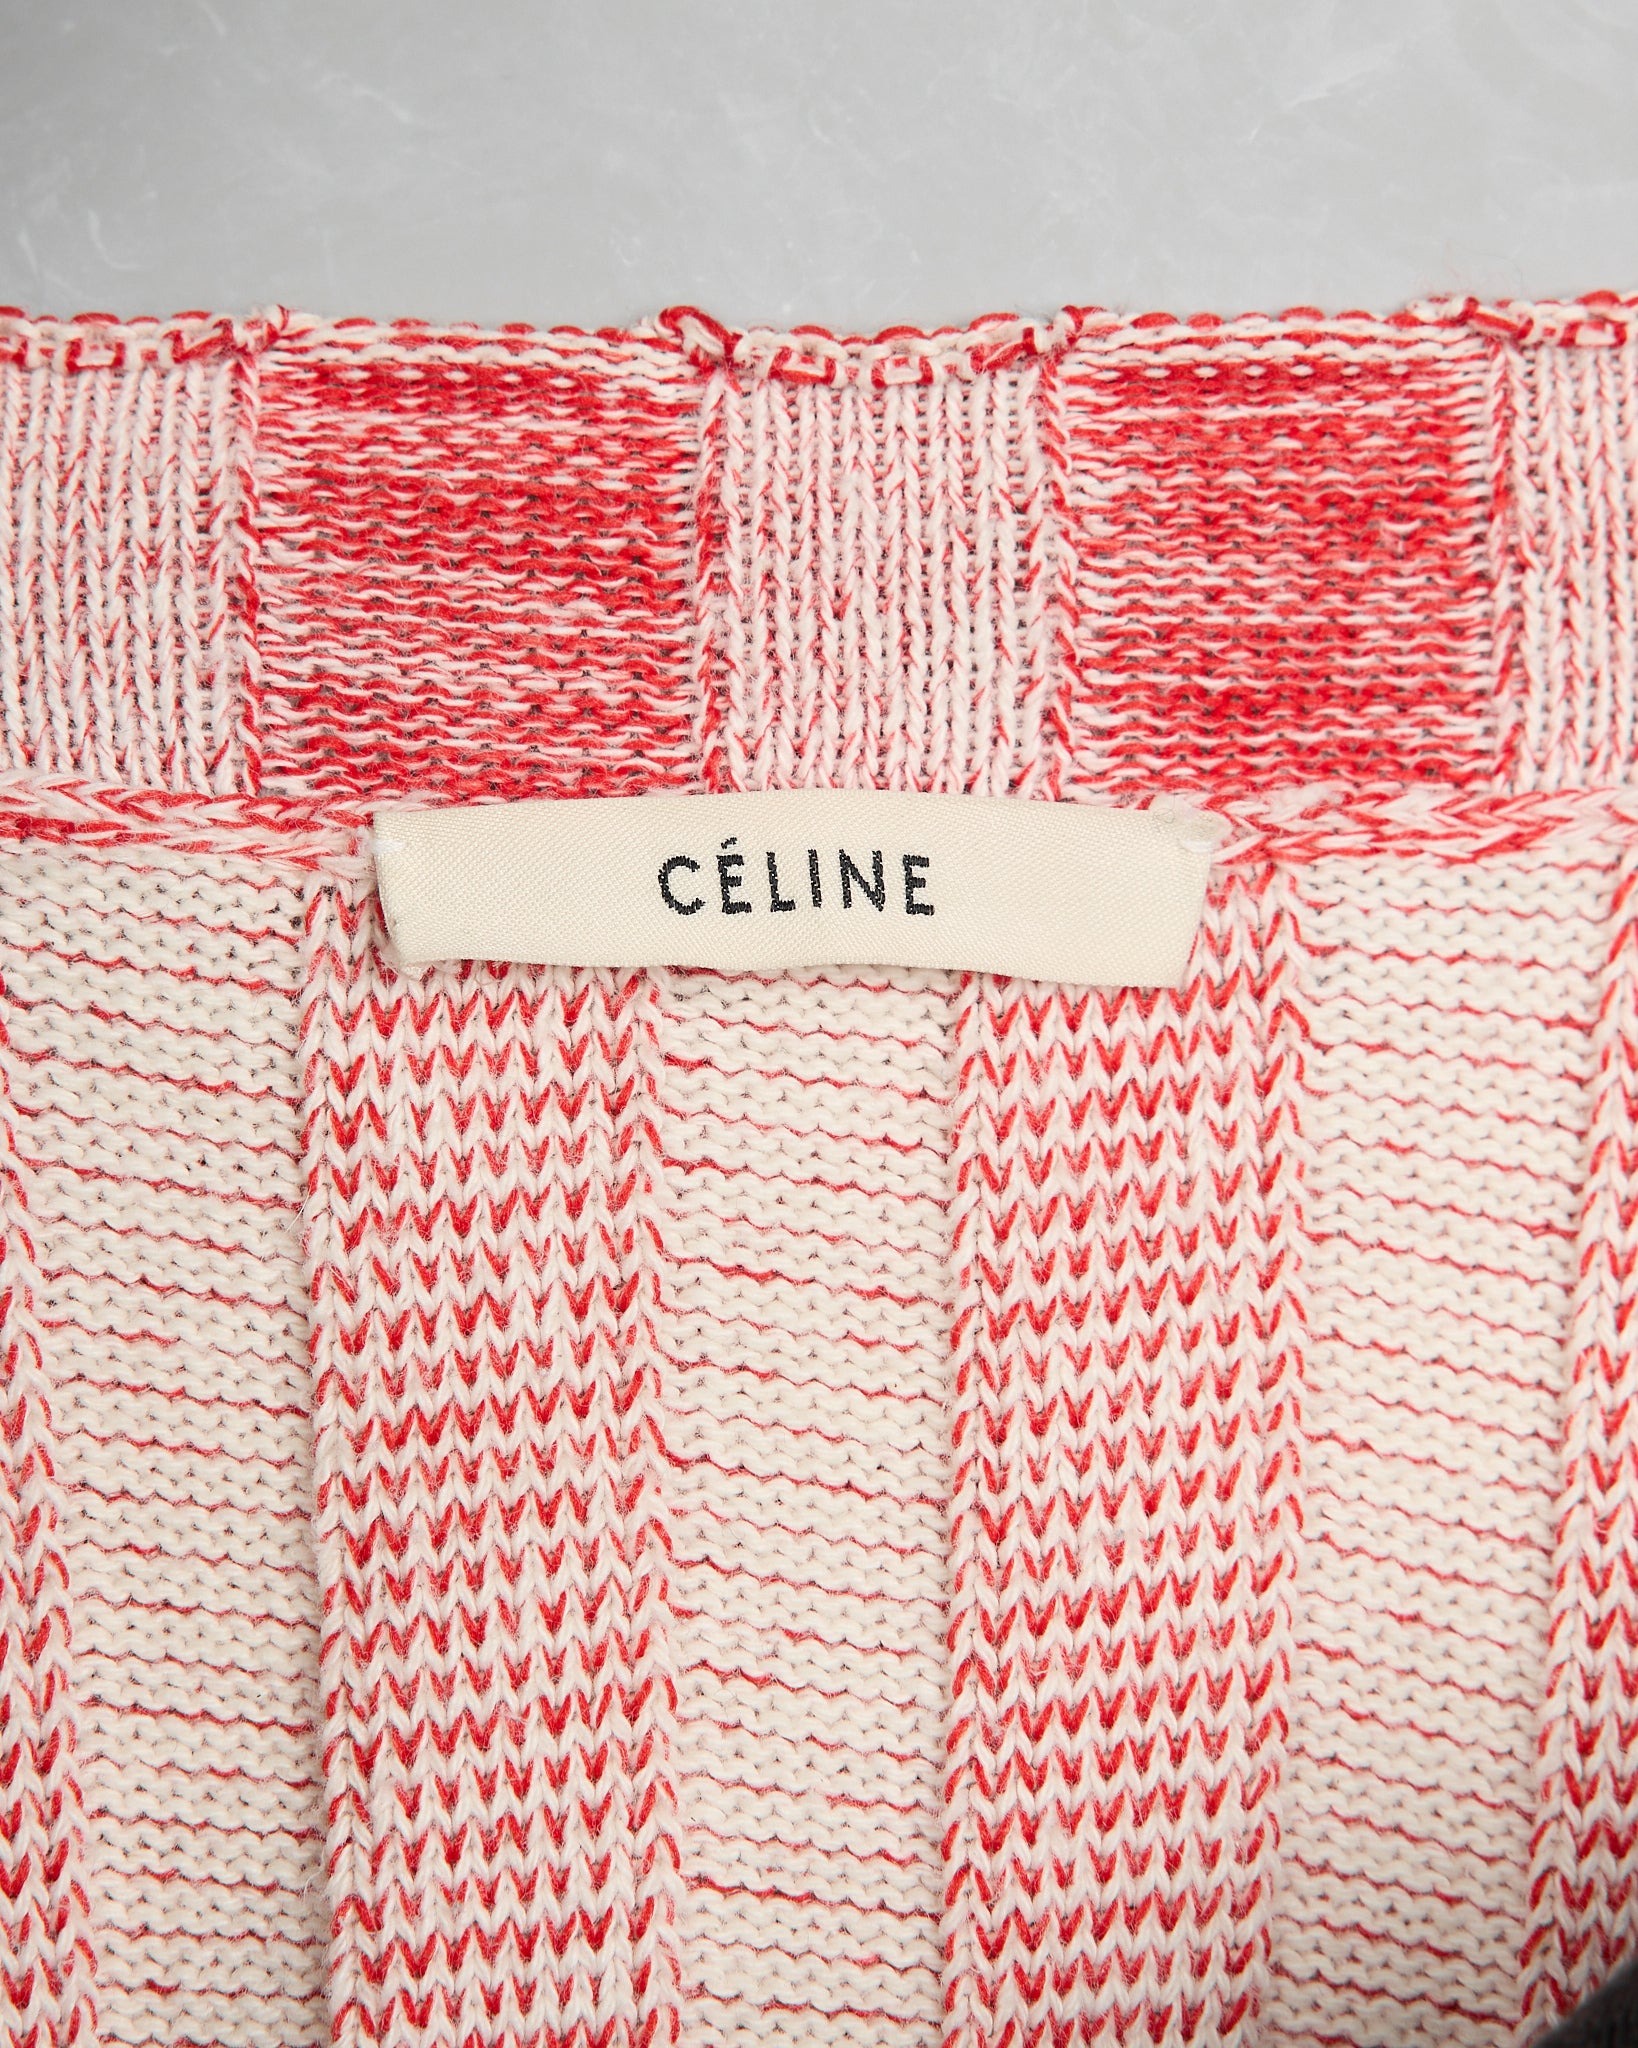 Celine by Phoebe Philo Red Striped Turtleneck - SS17 tag photo